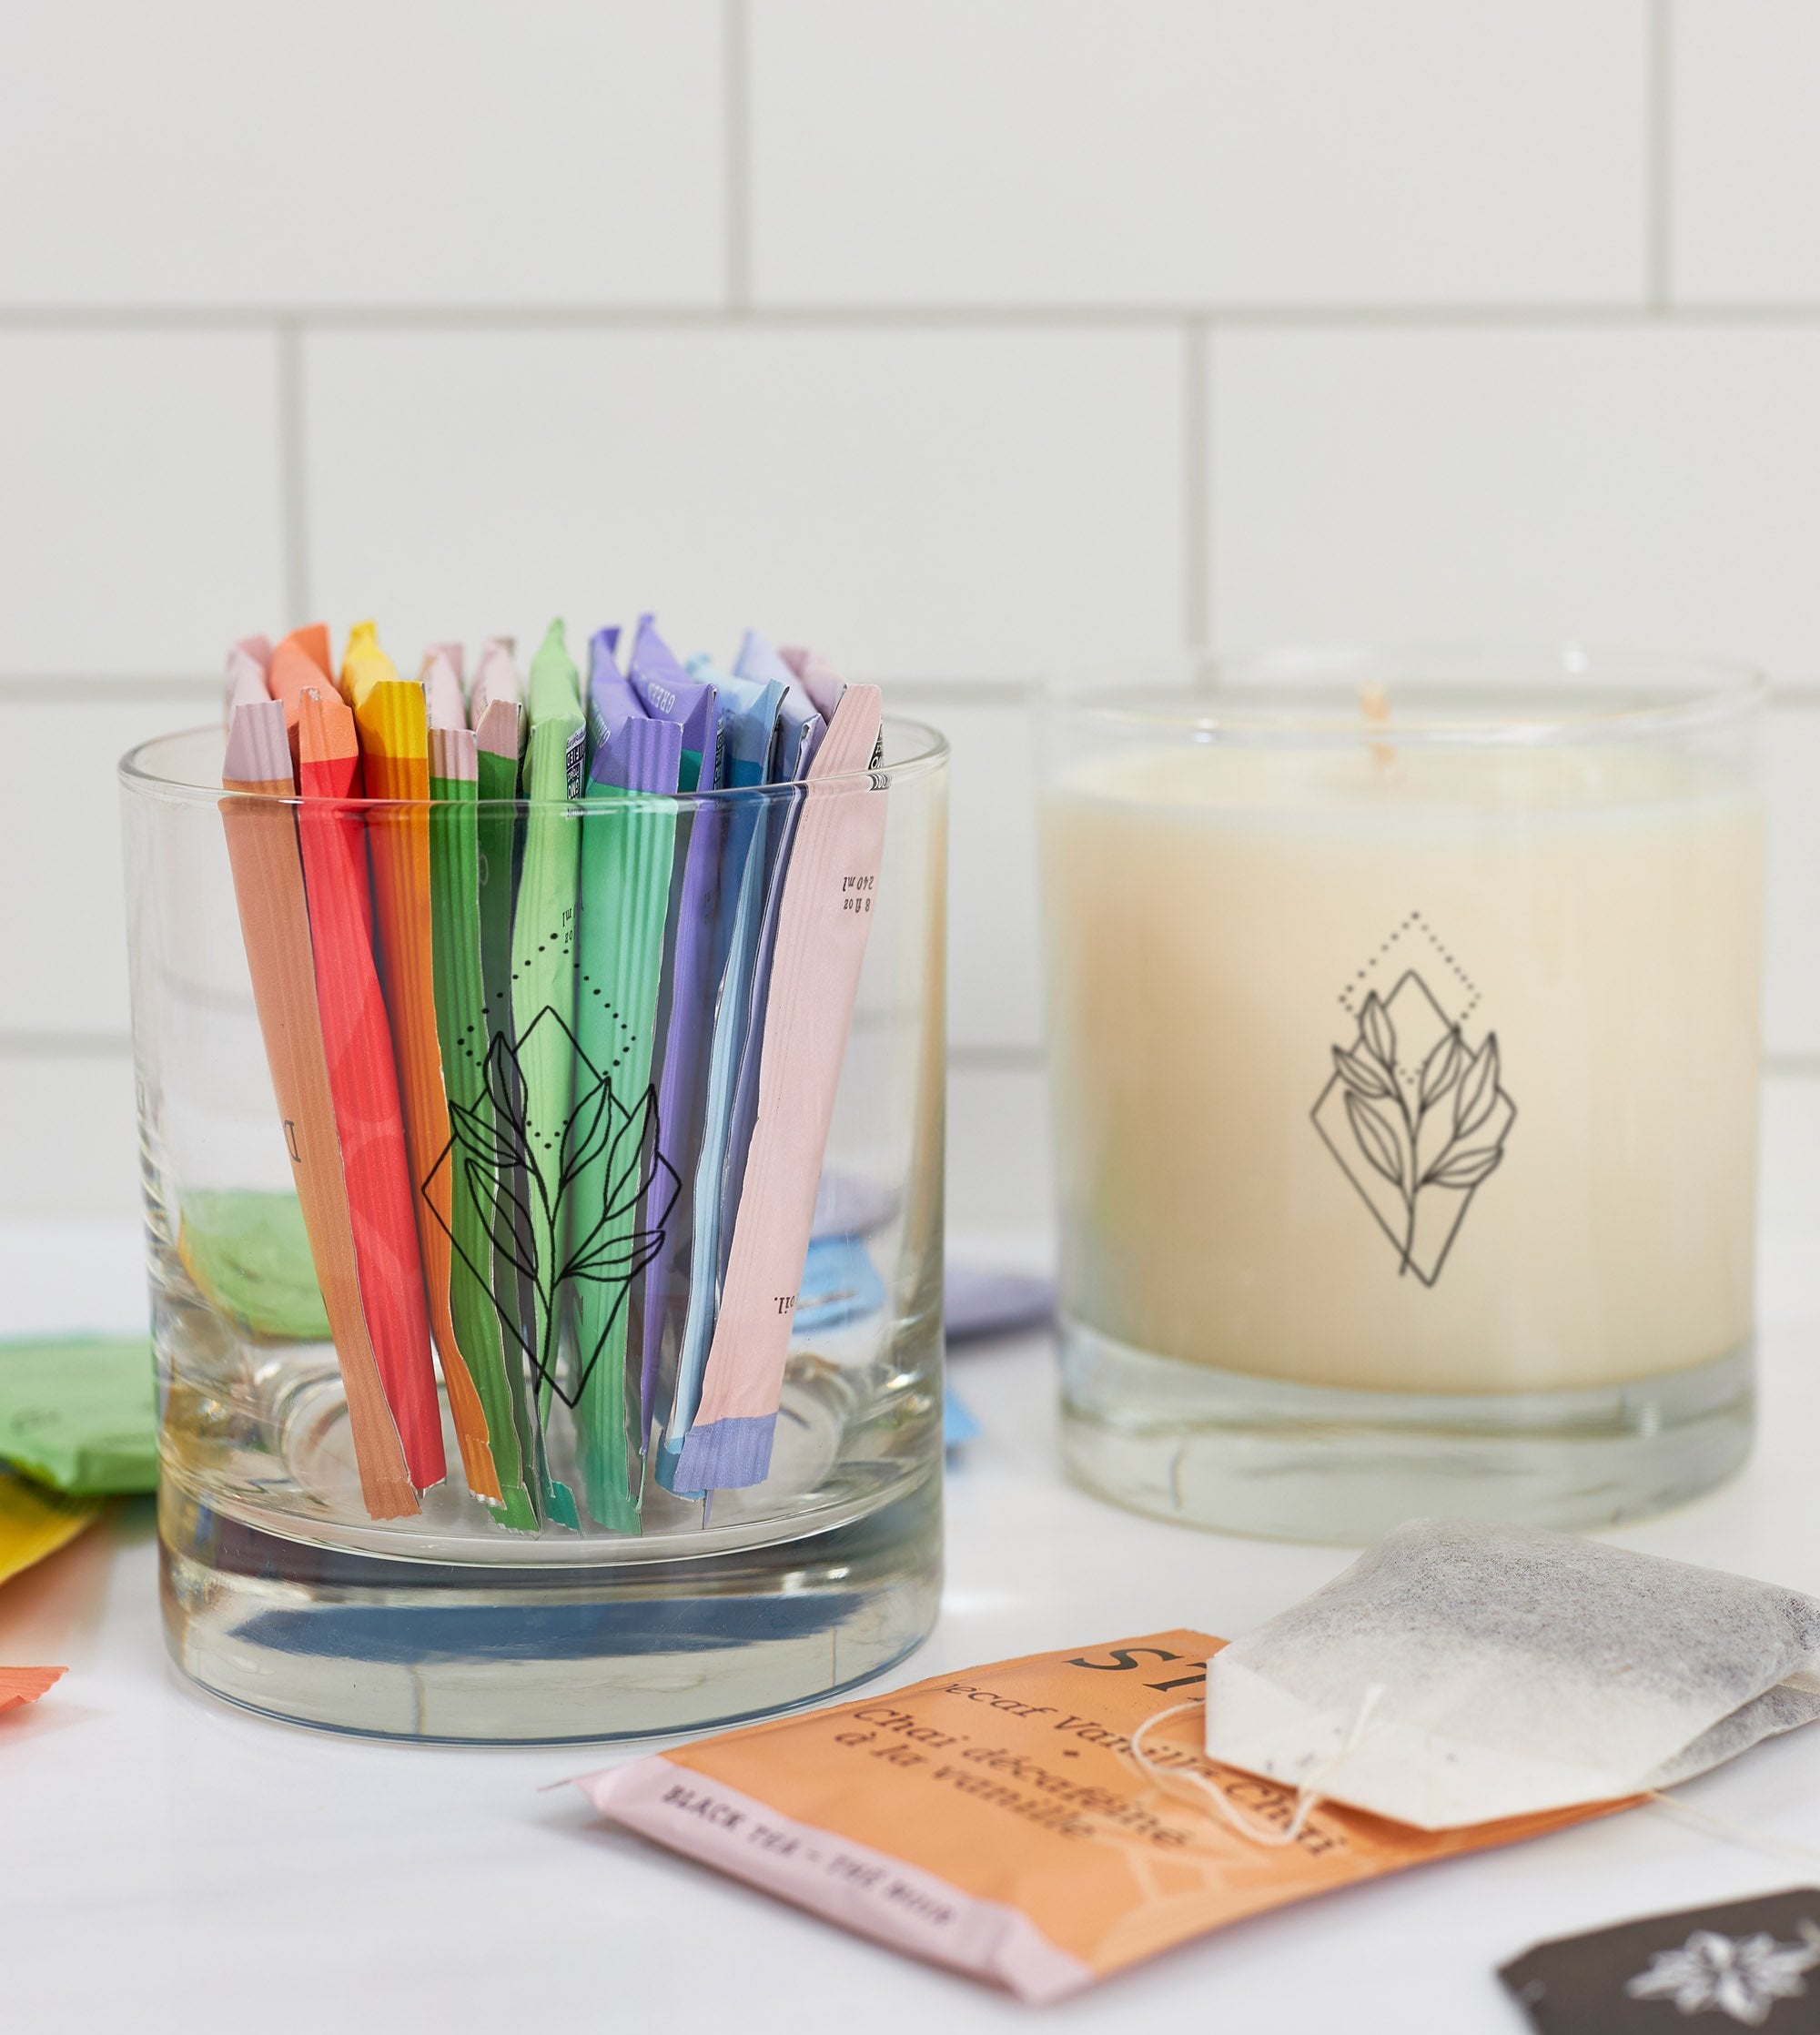 Relaxation Wellness Meditation Soy Candle